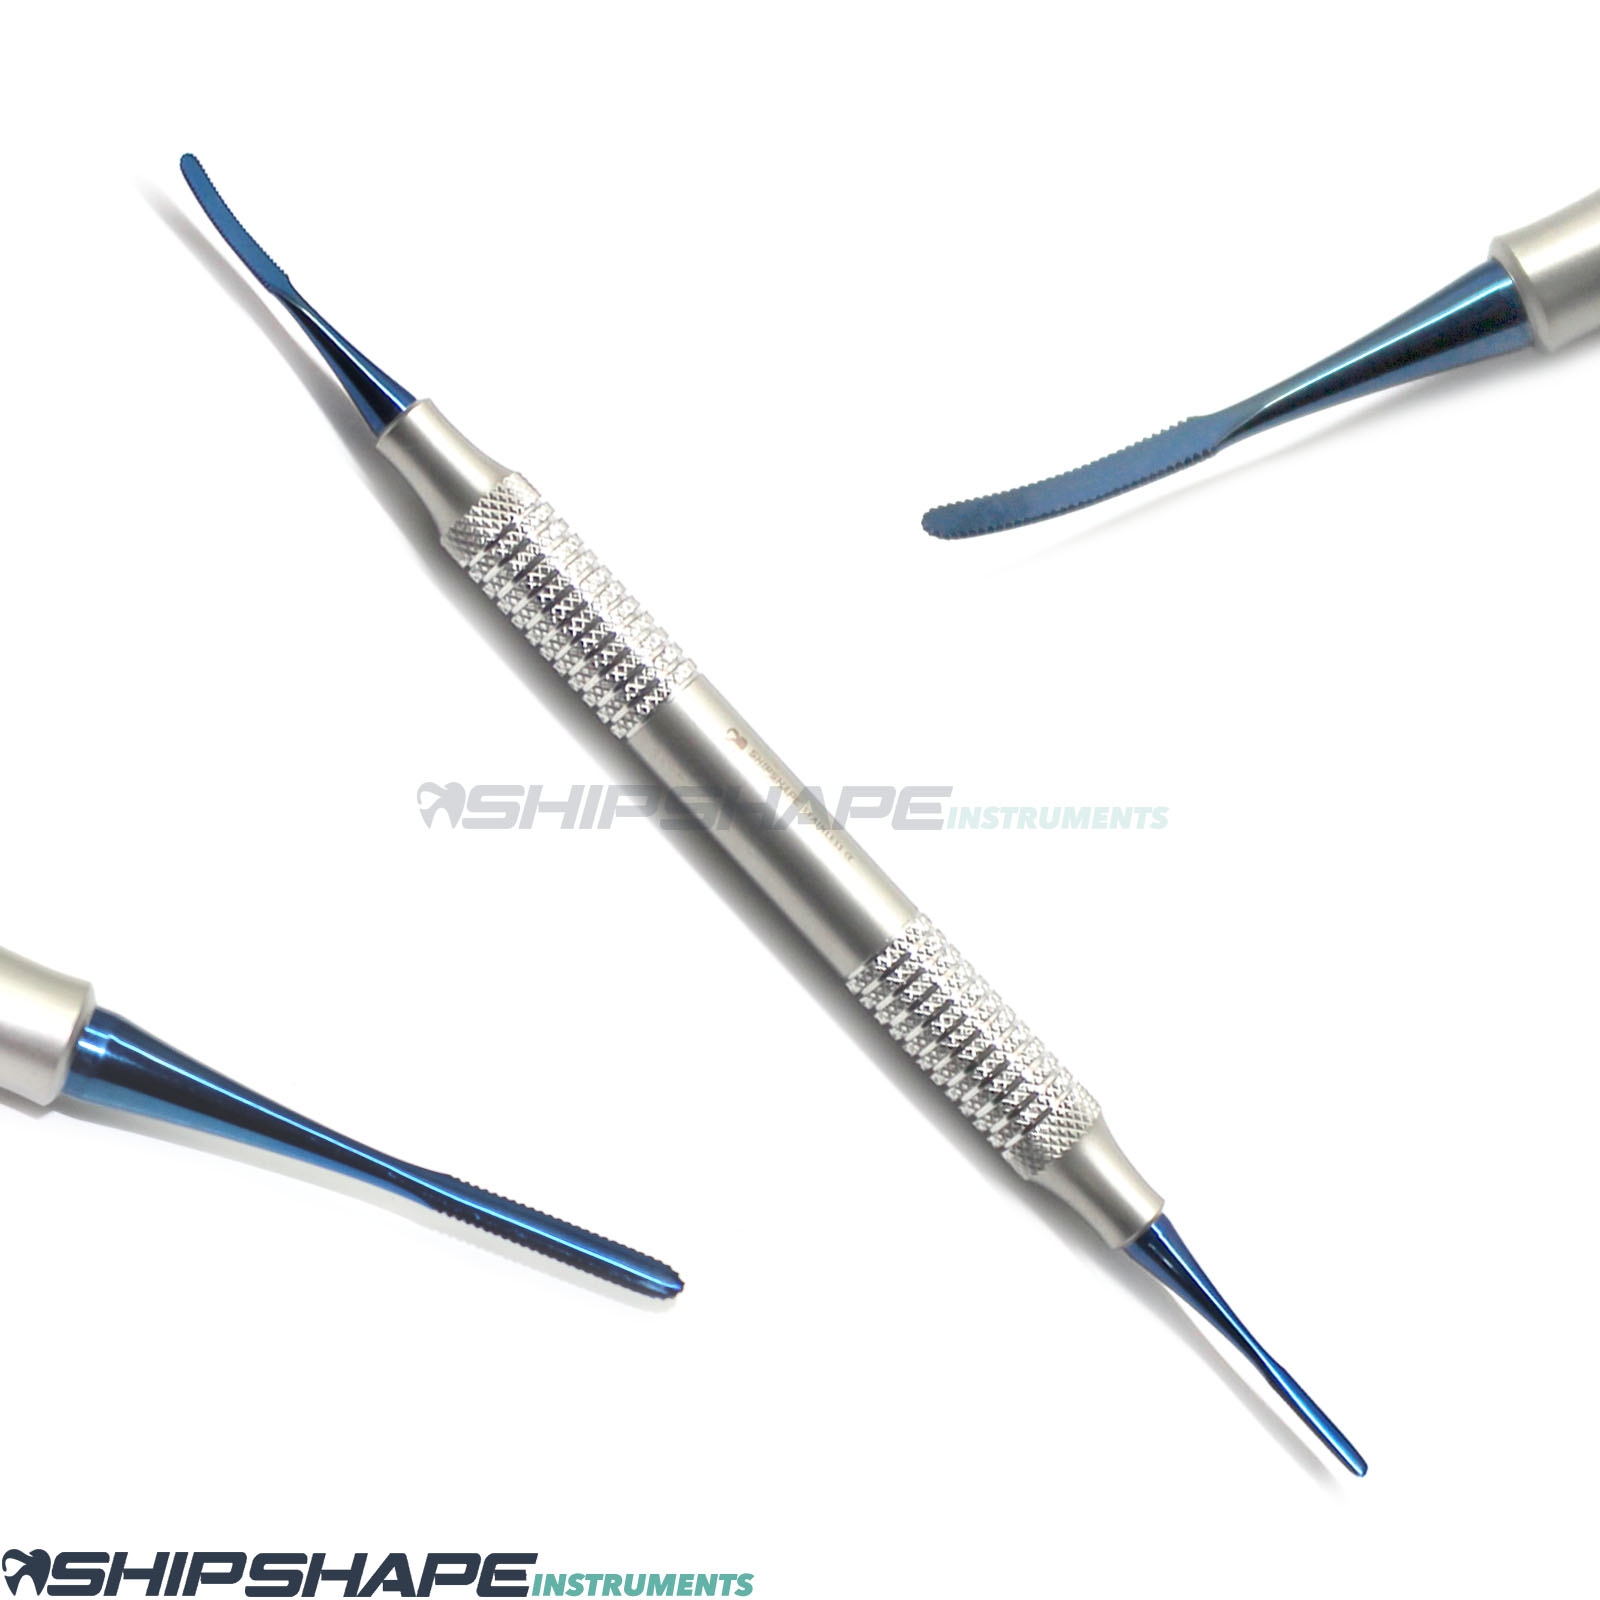 Periotome PPAELA Implant Placement Serrated Posterior Extraction Instruments Shipshape Instruments-0